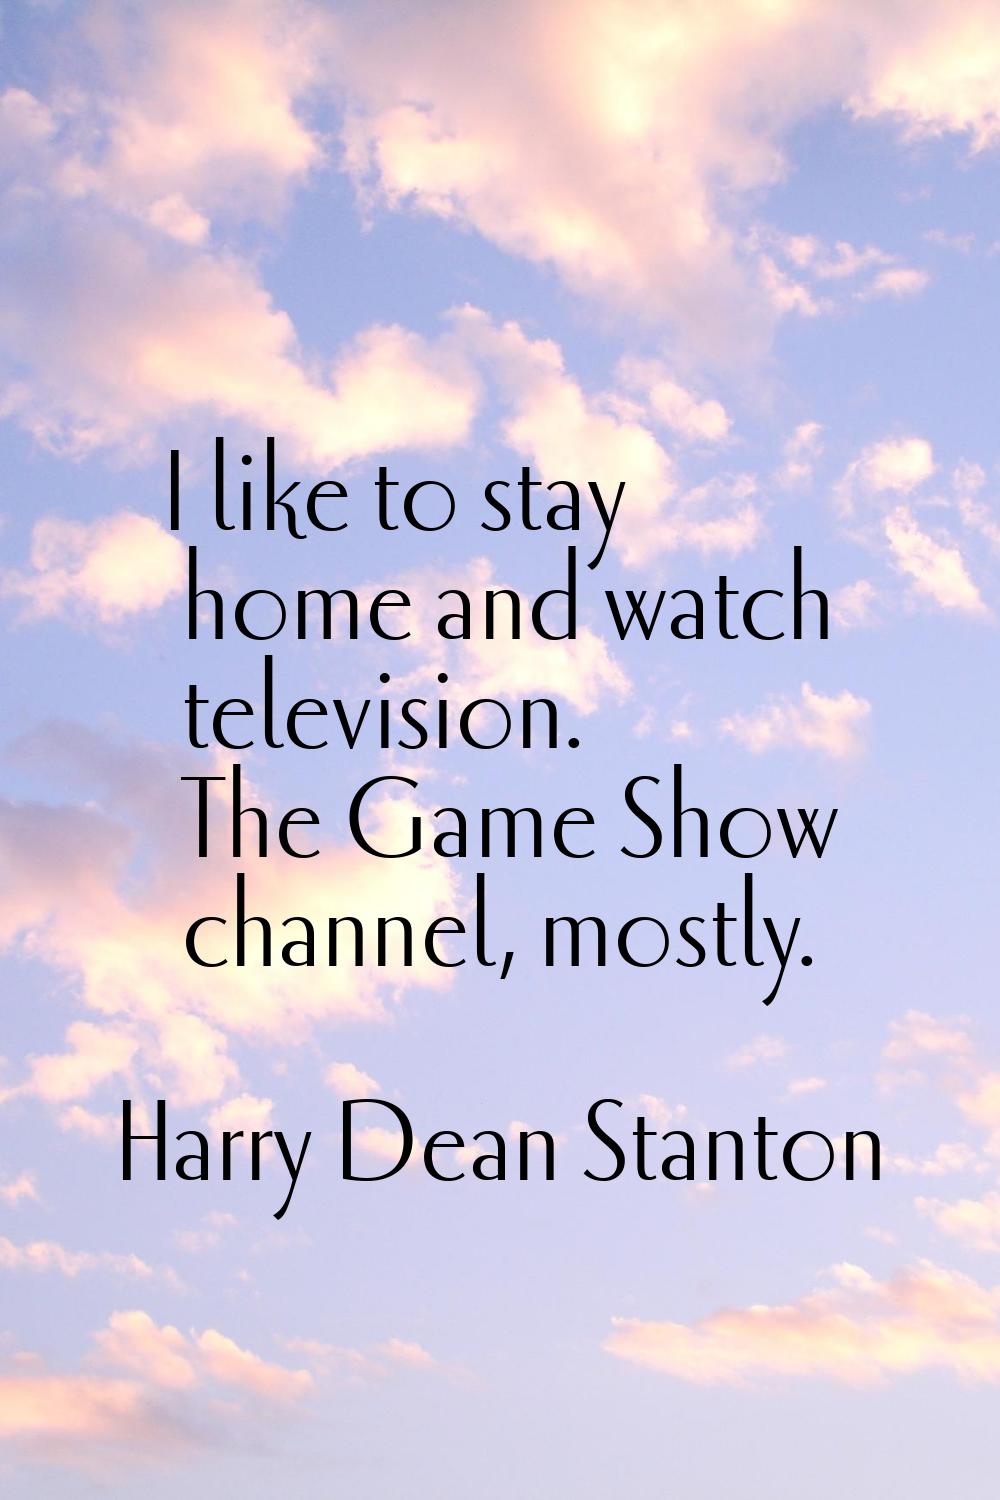 I like to stay home and watch television. The Game Show channel, mostly.